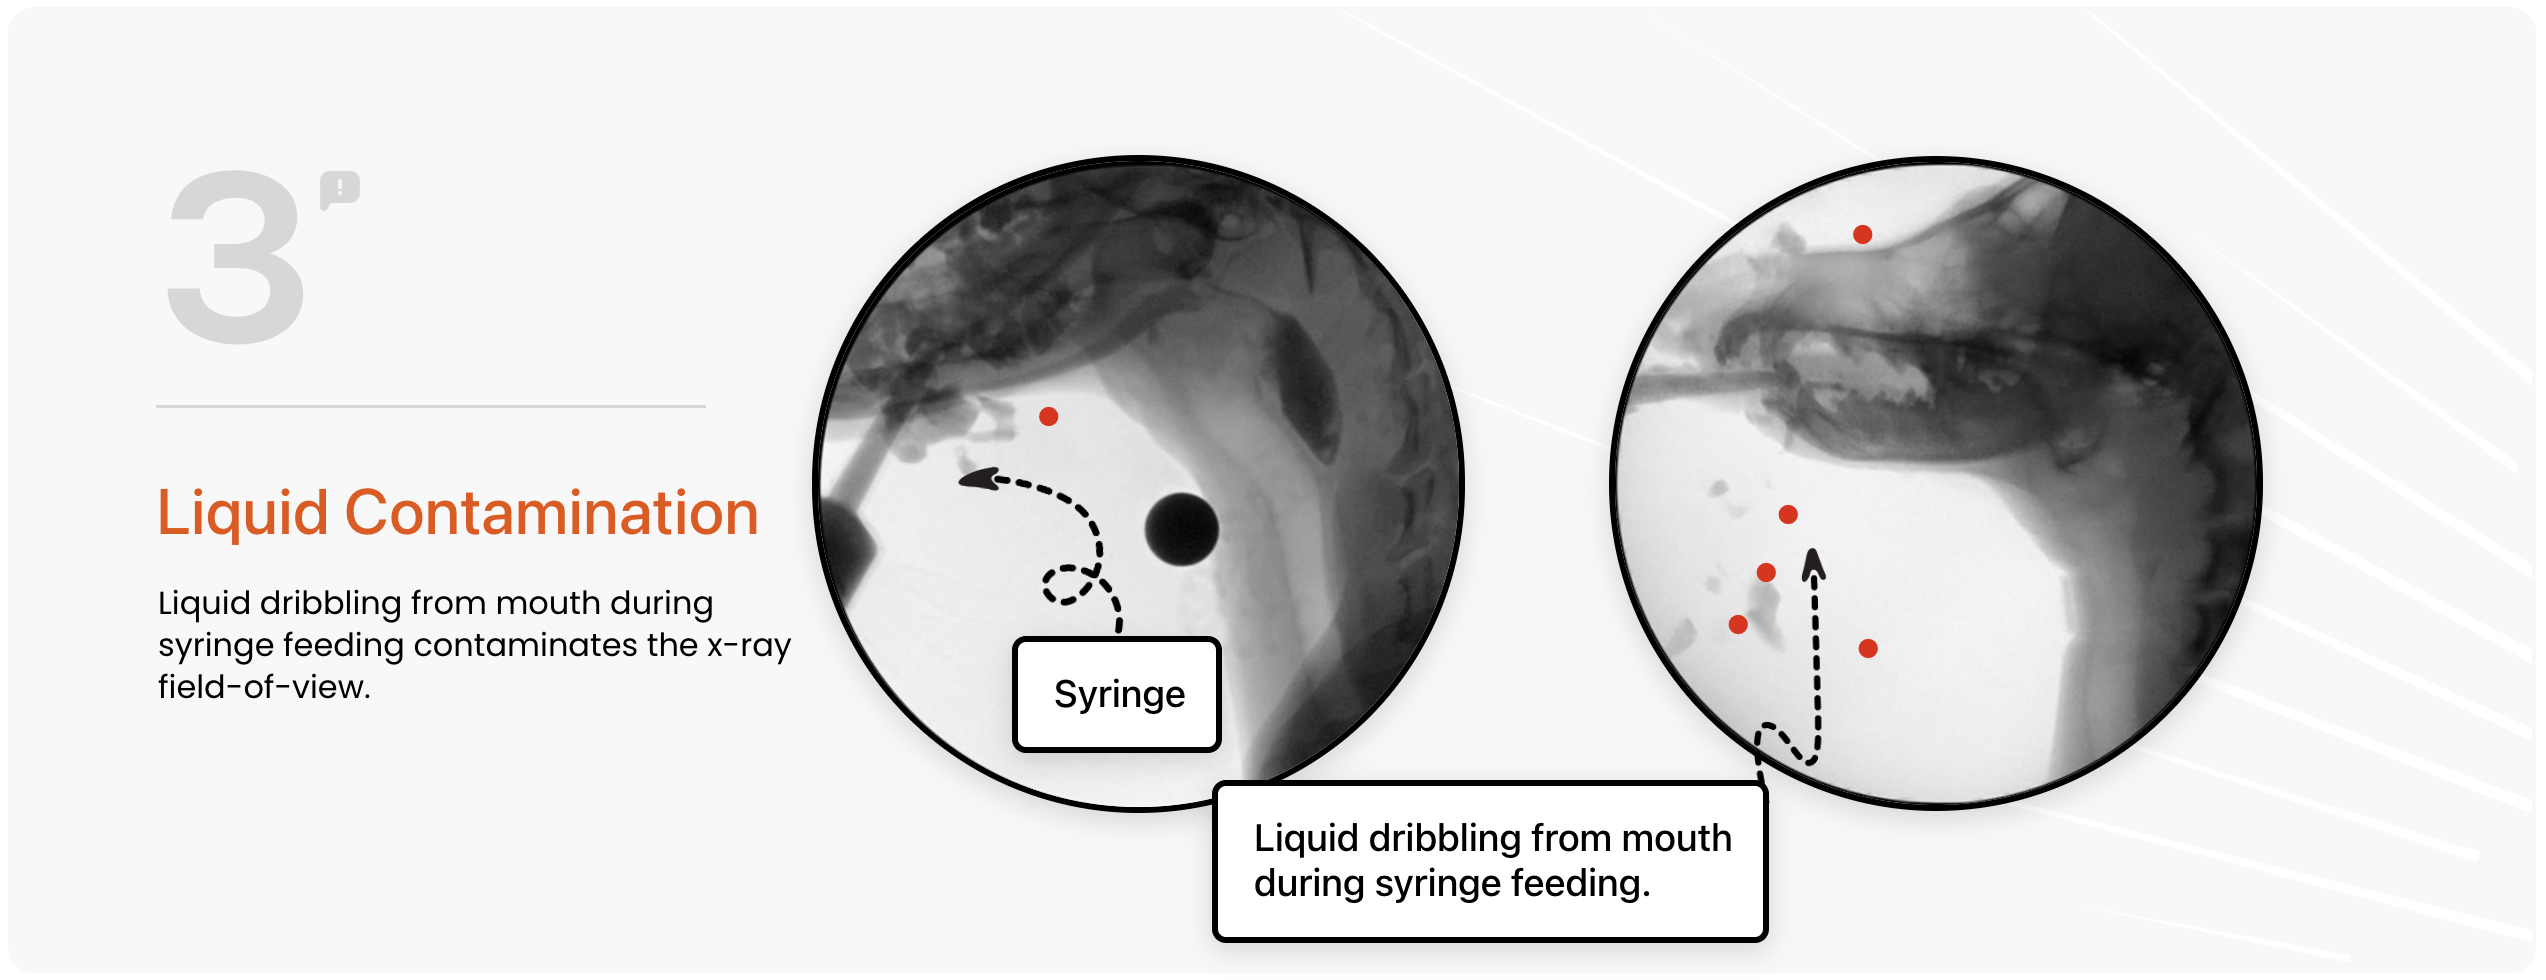 Liquid dribbling from the mouth during syringe feeding contaminates the x-ray field-of-view.